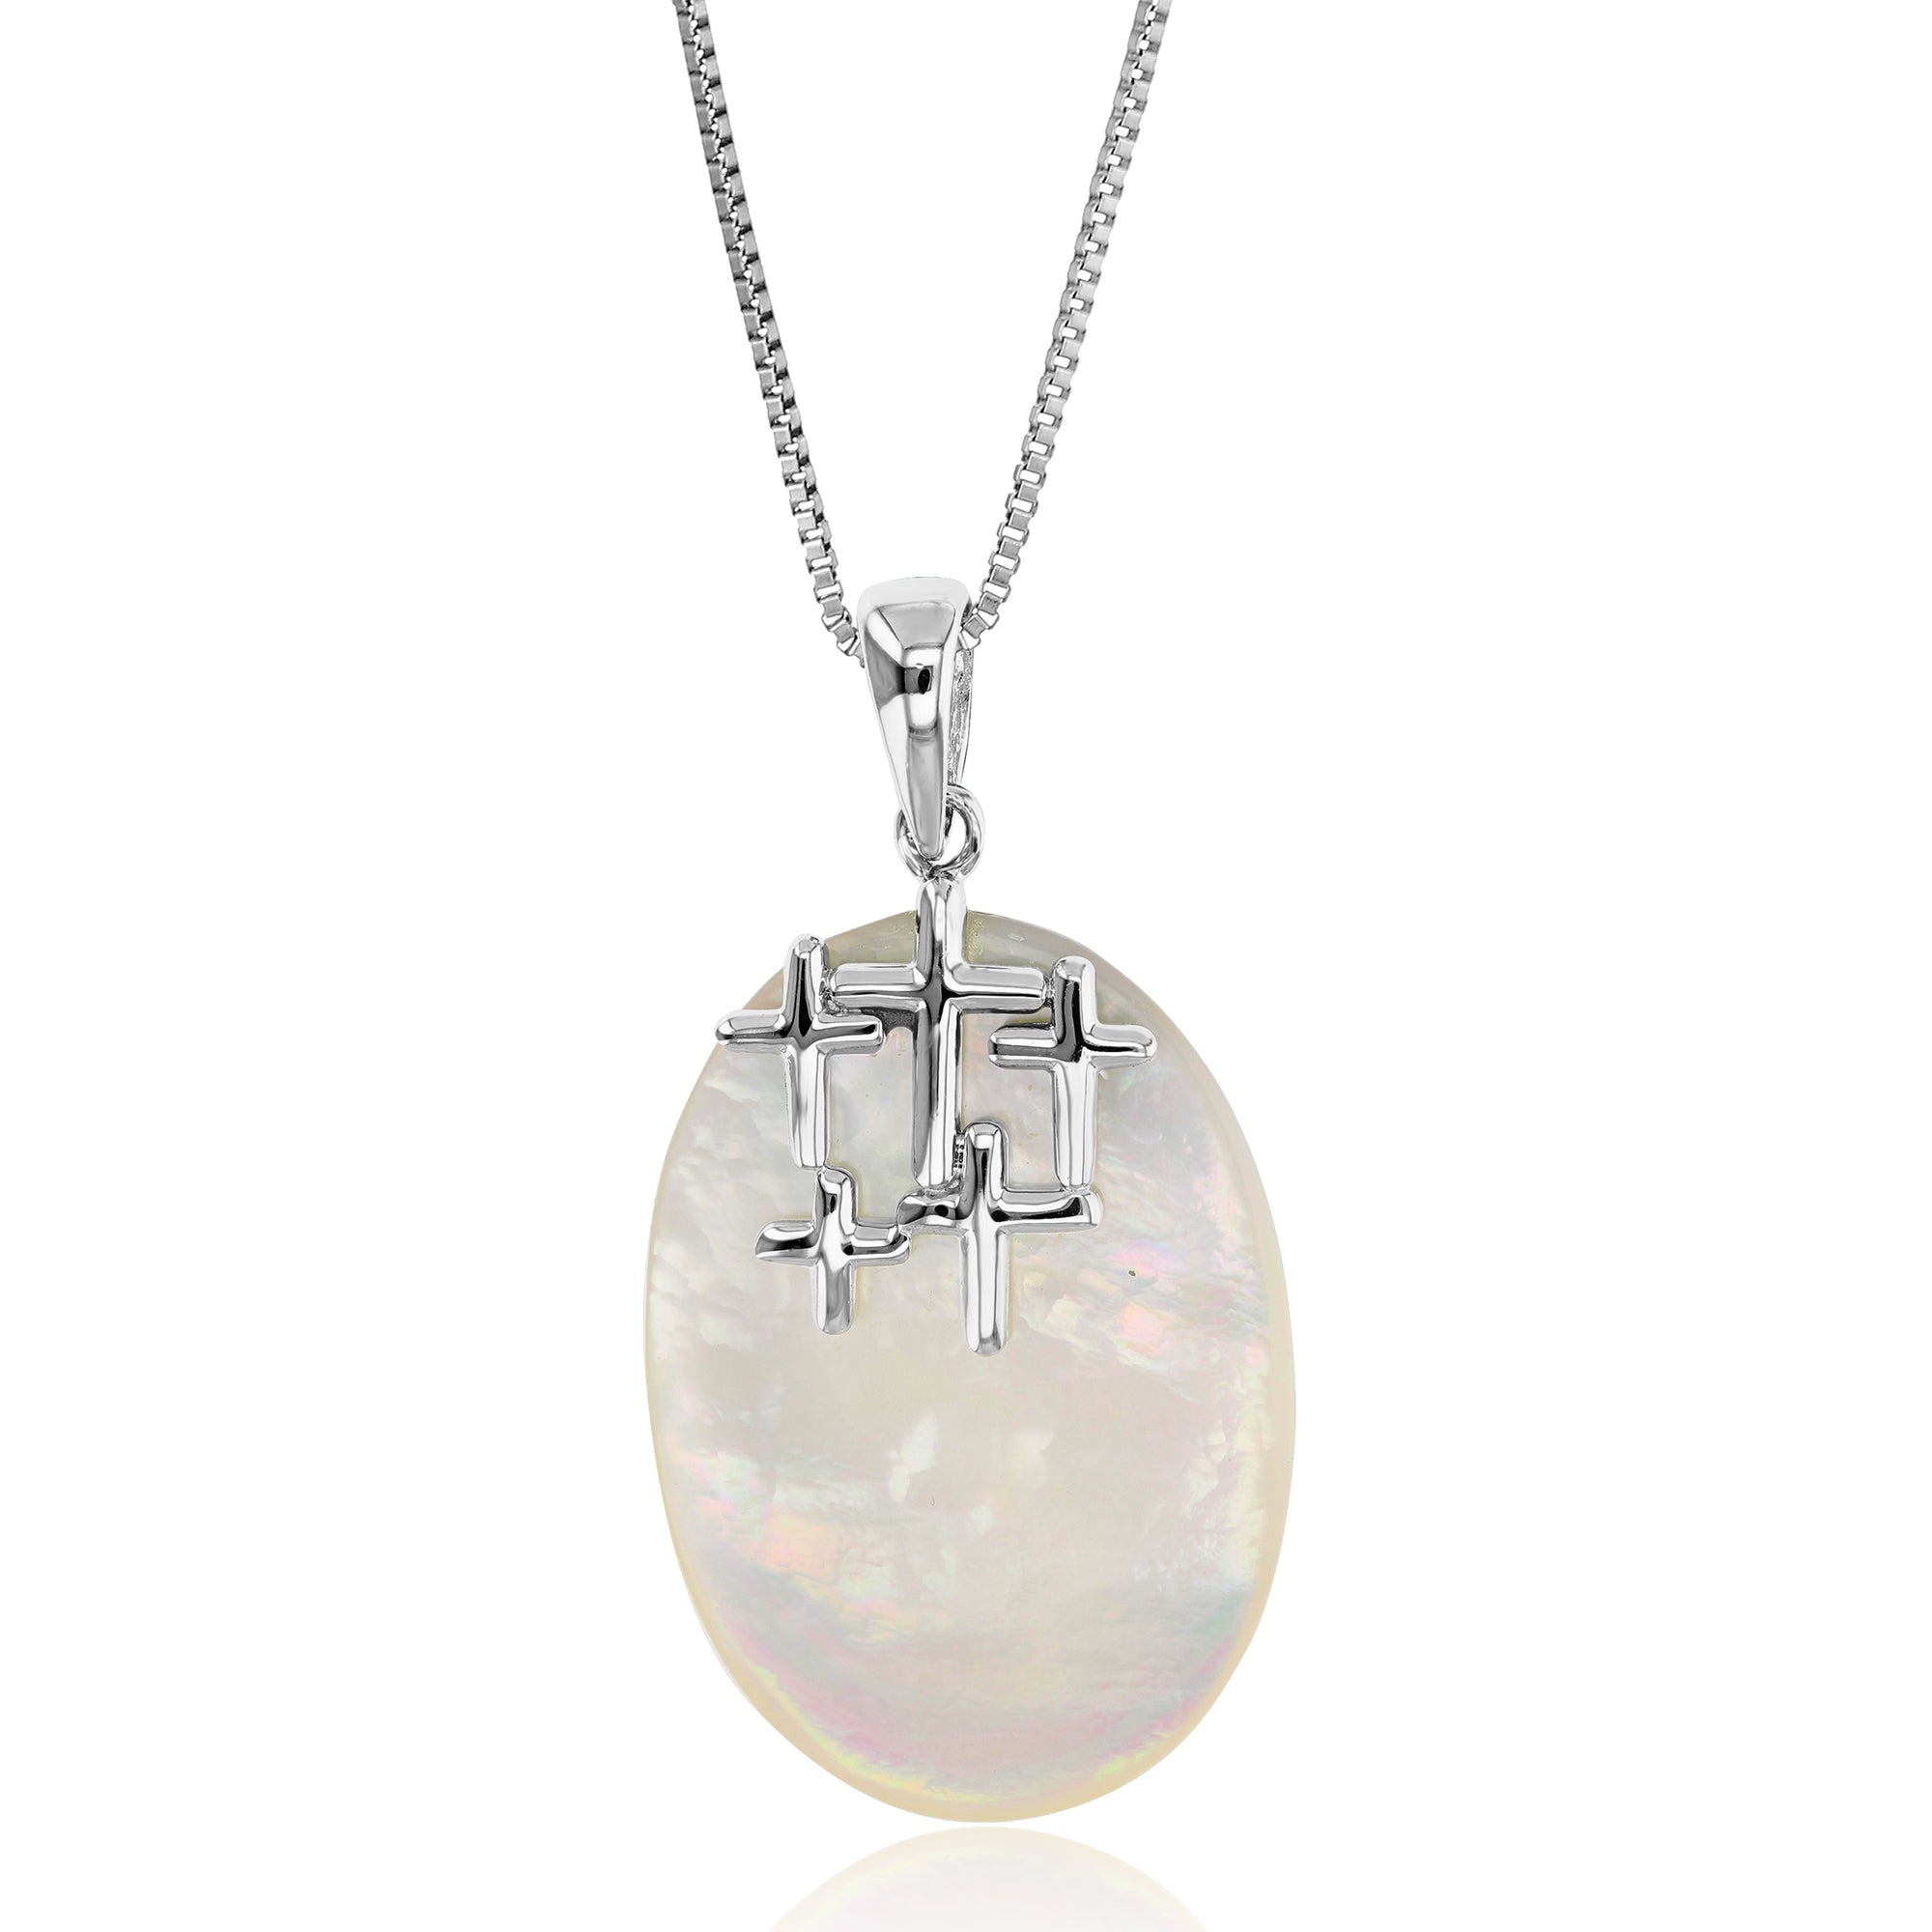 Pearl Pendant Necklace, Sterling Silver Mother of Pearl Pendant Necklace for Women with 18 Inch Chain